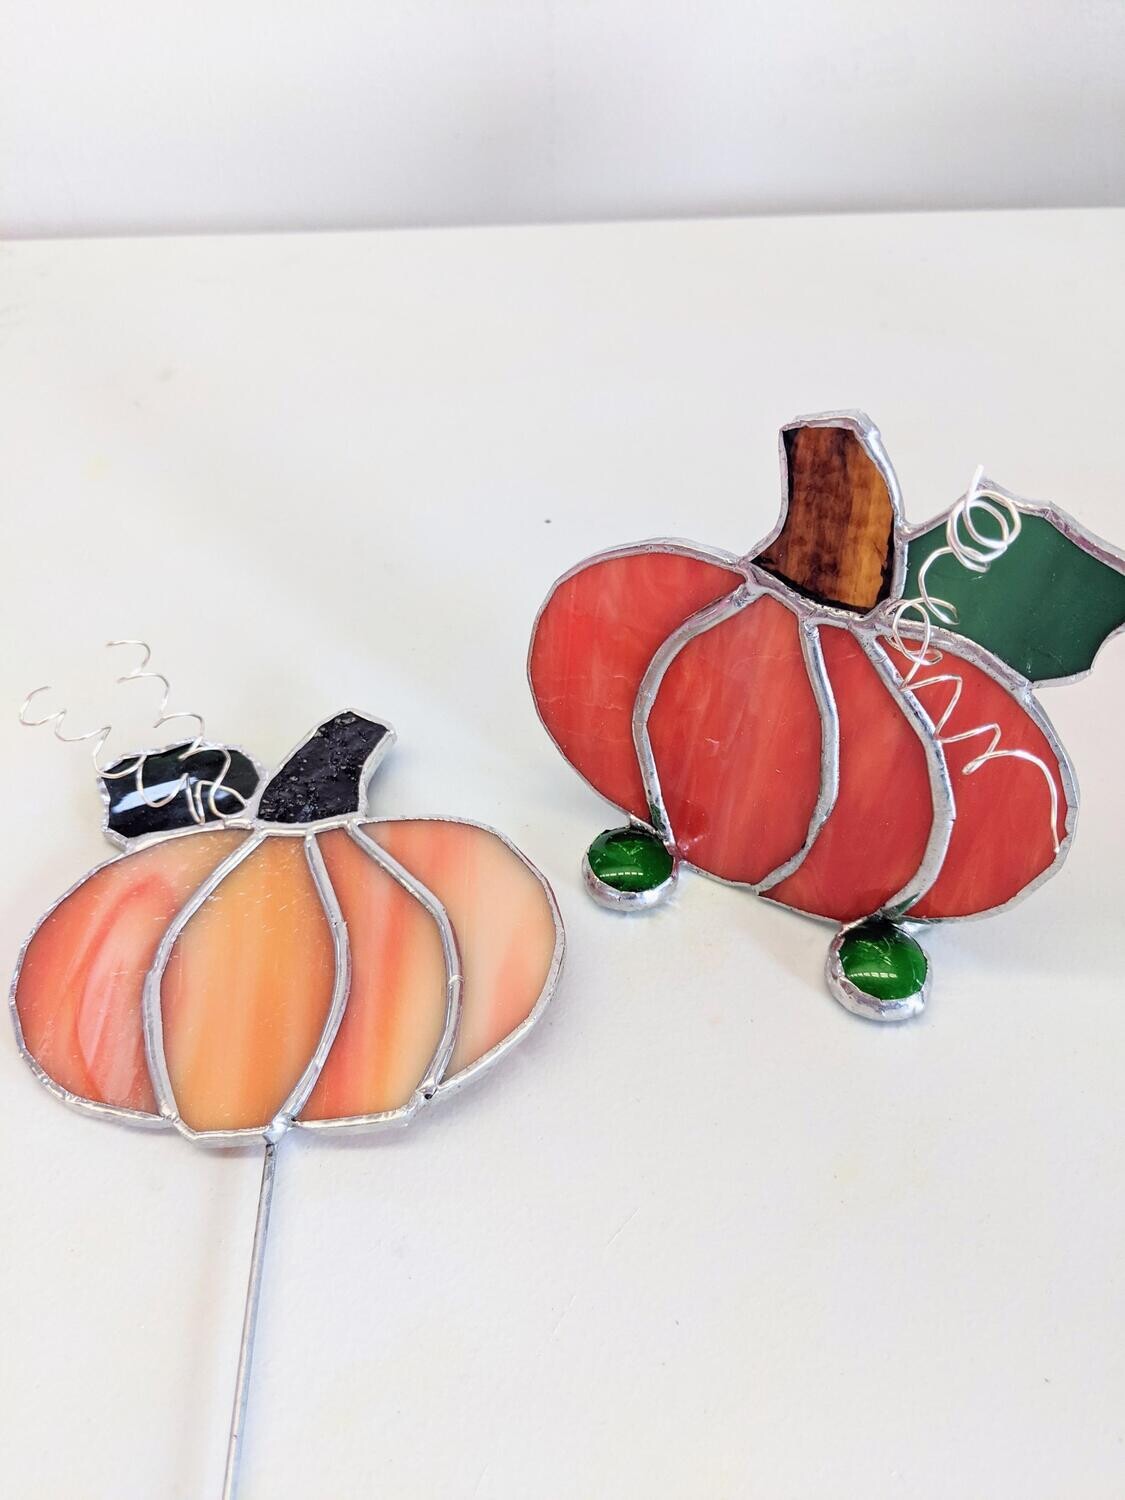 Create a Stained Glass Pumpkin (October)